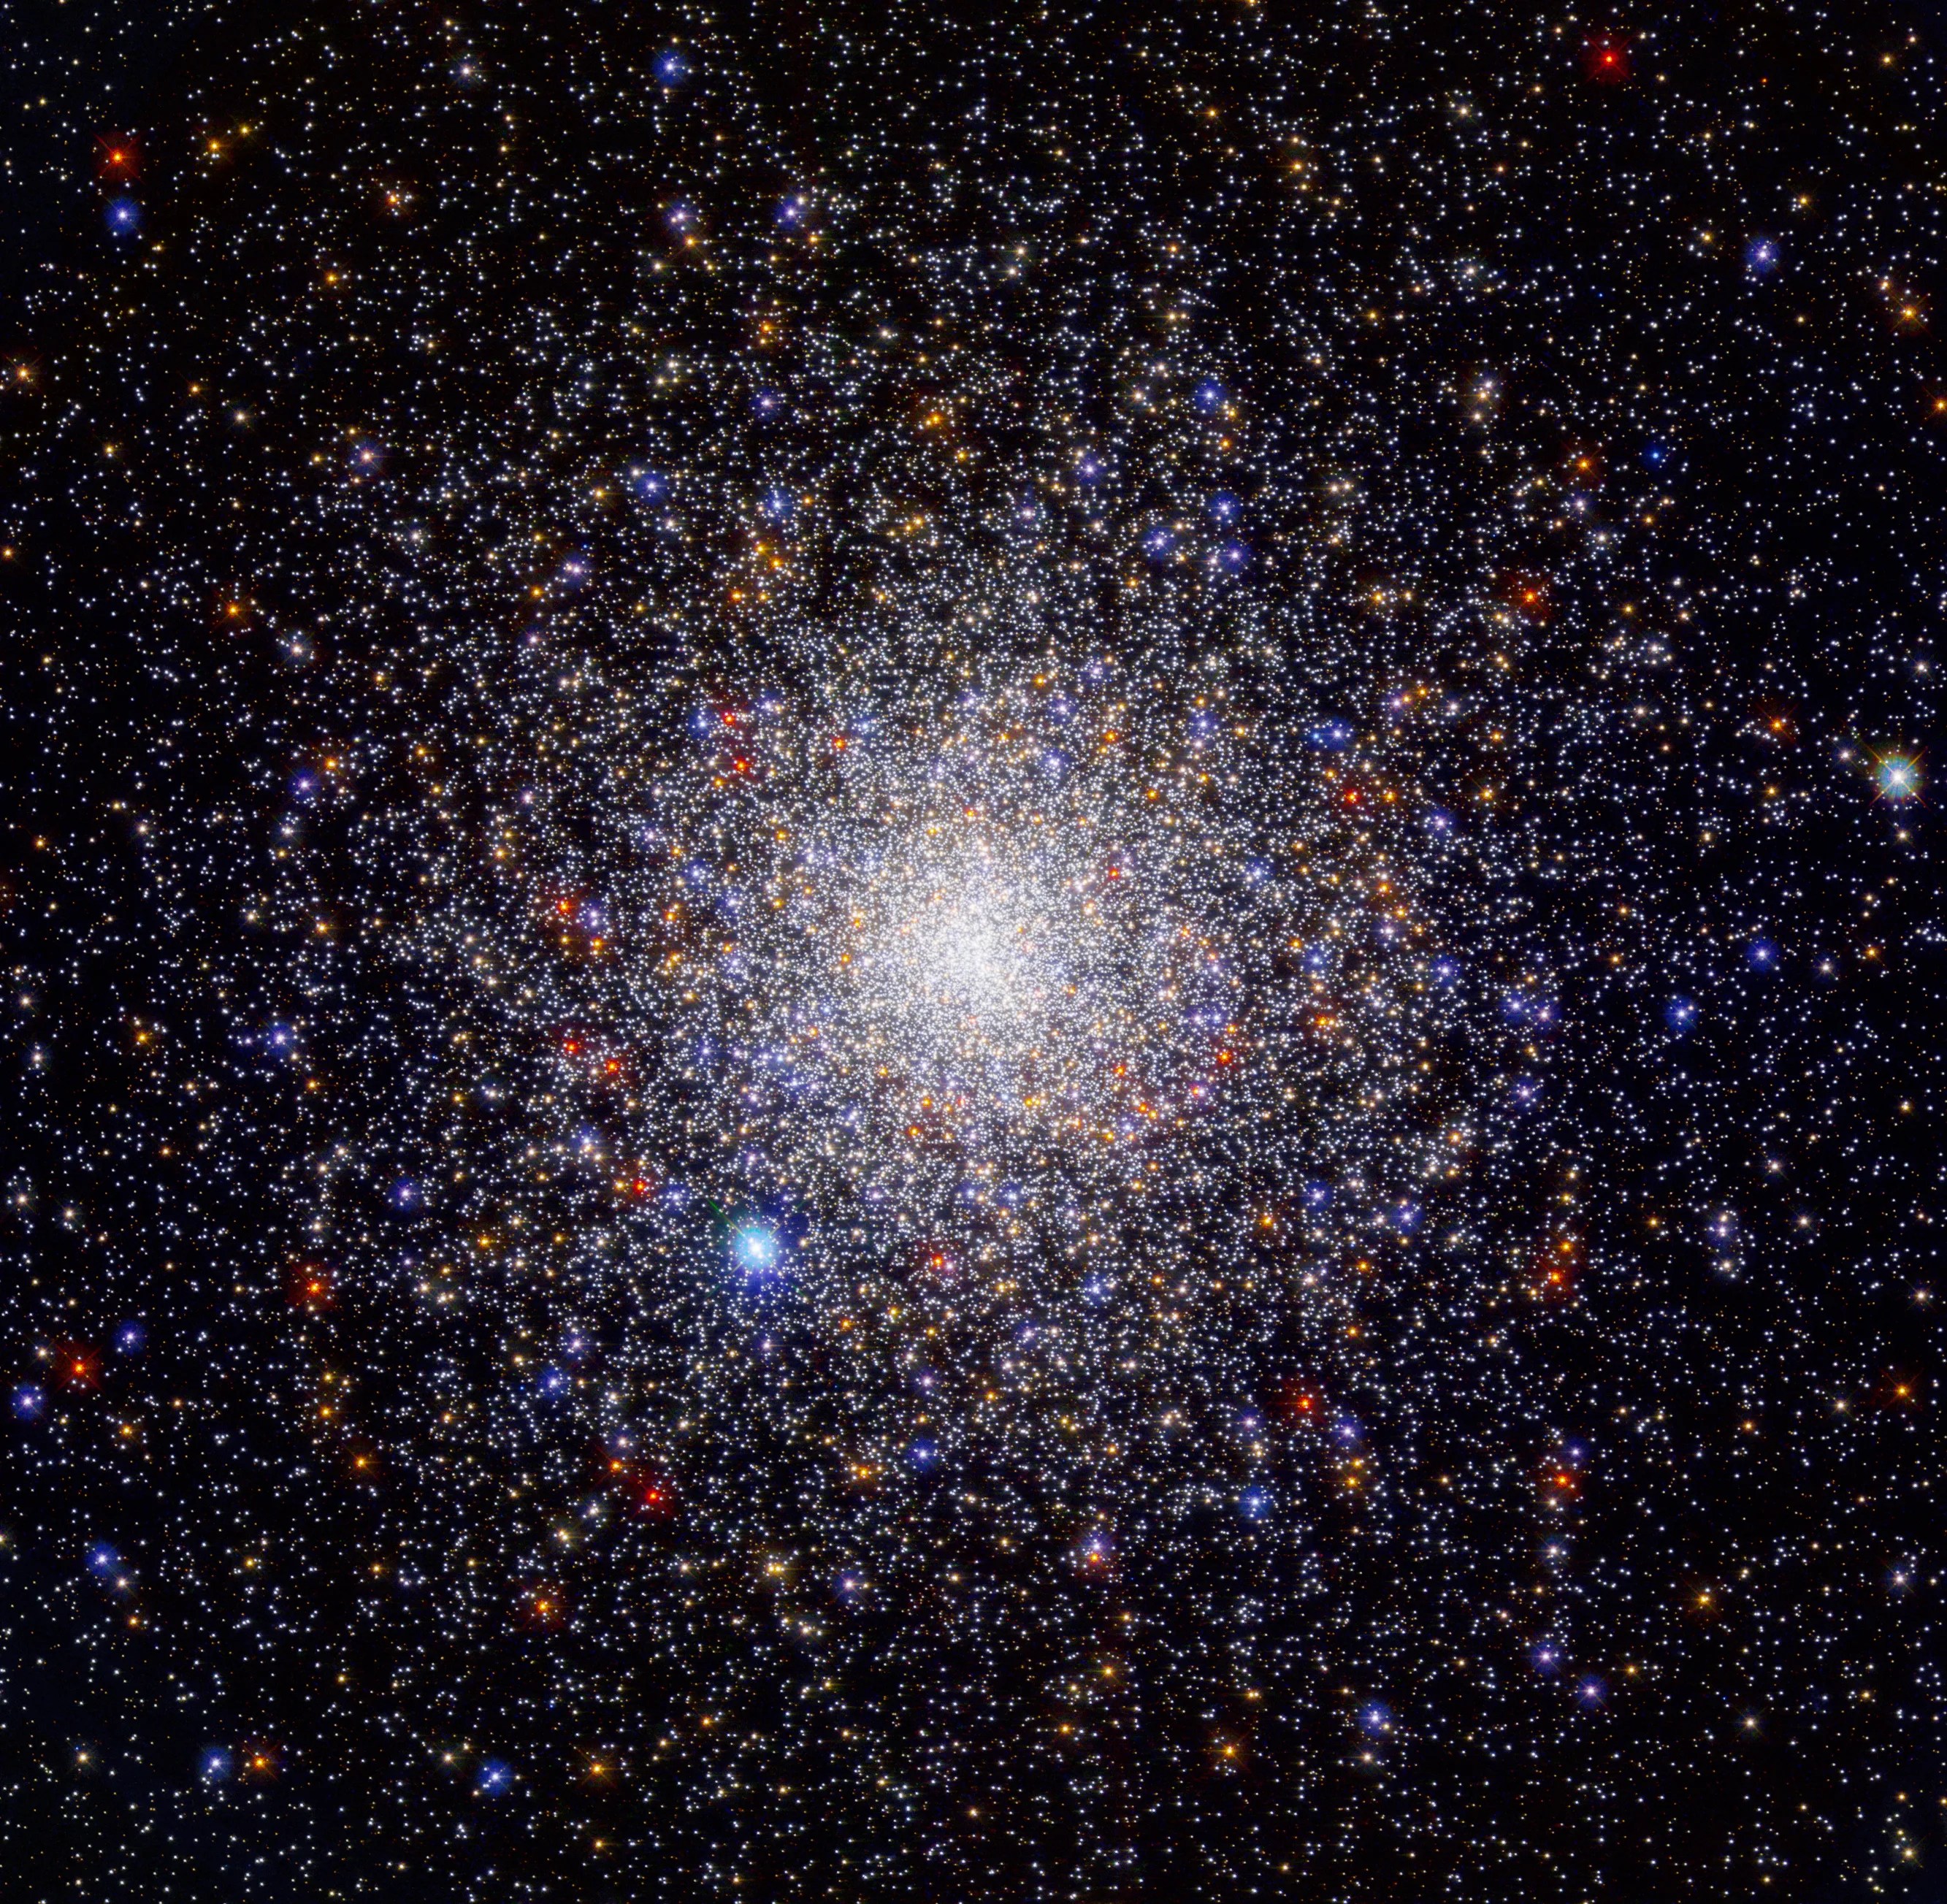 This is a globular cluster, a sphere of tens of thousands of stars. Most of them are a whitish color, but there are many bright red, yellow, and blue stars mixed in. The stars are more concentrated in the center of the sphere. As you move farther from the center, there are fewer stars.